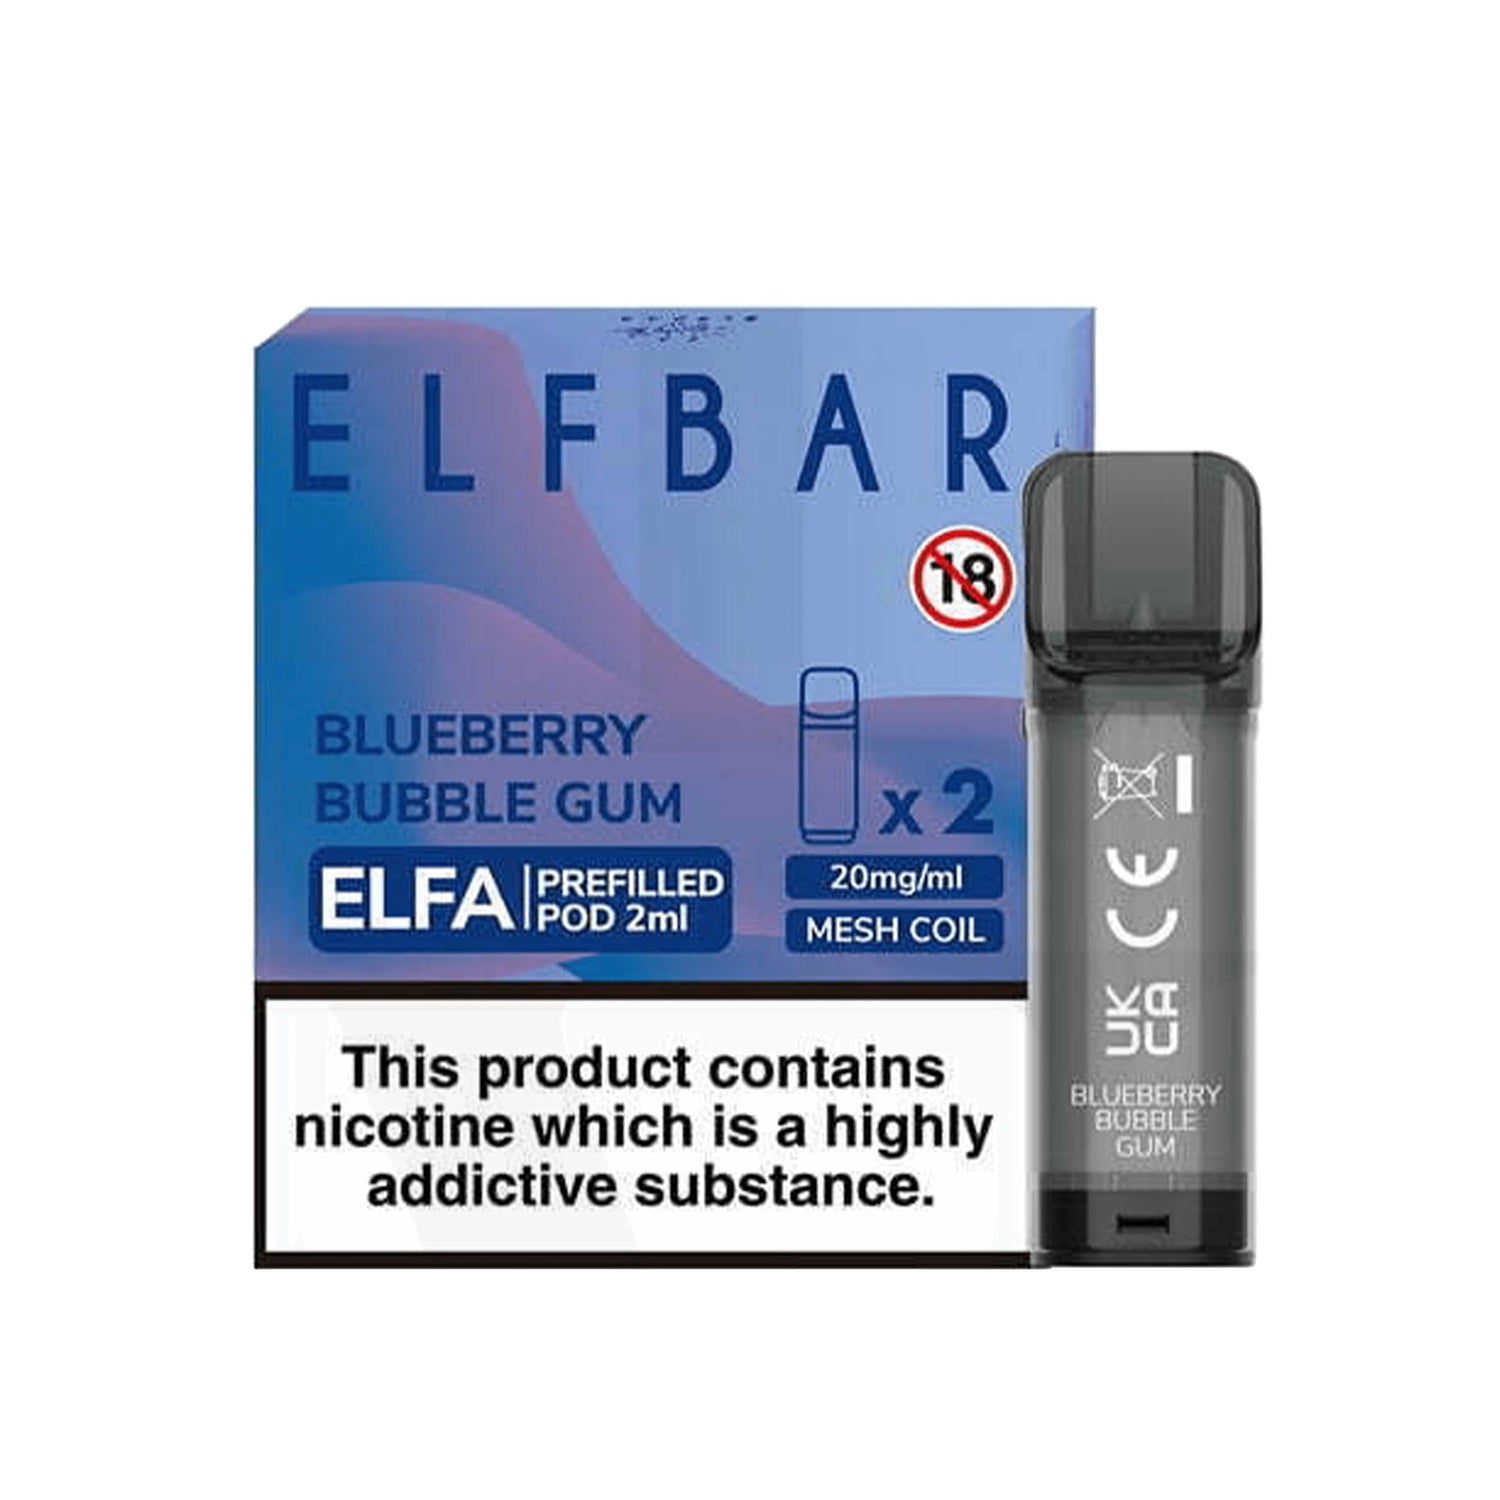 Blueberry Elf Bar Products